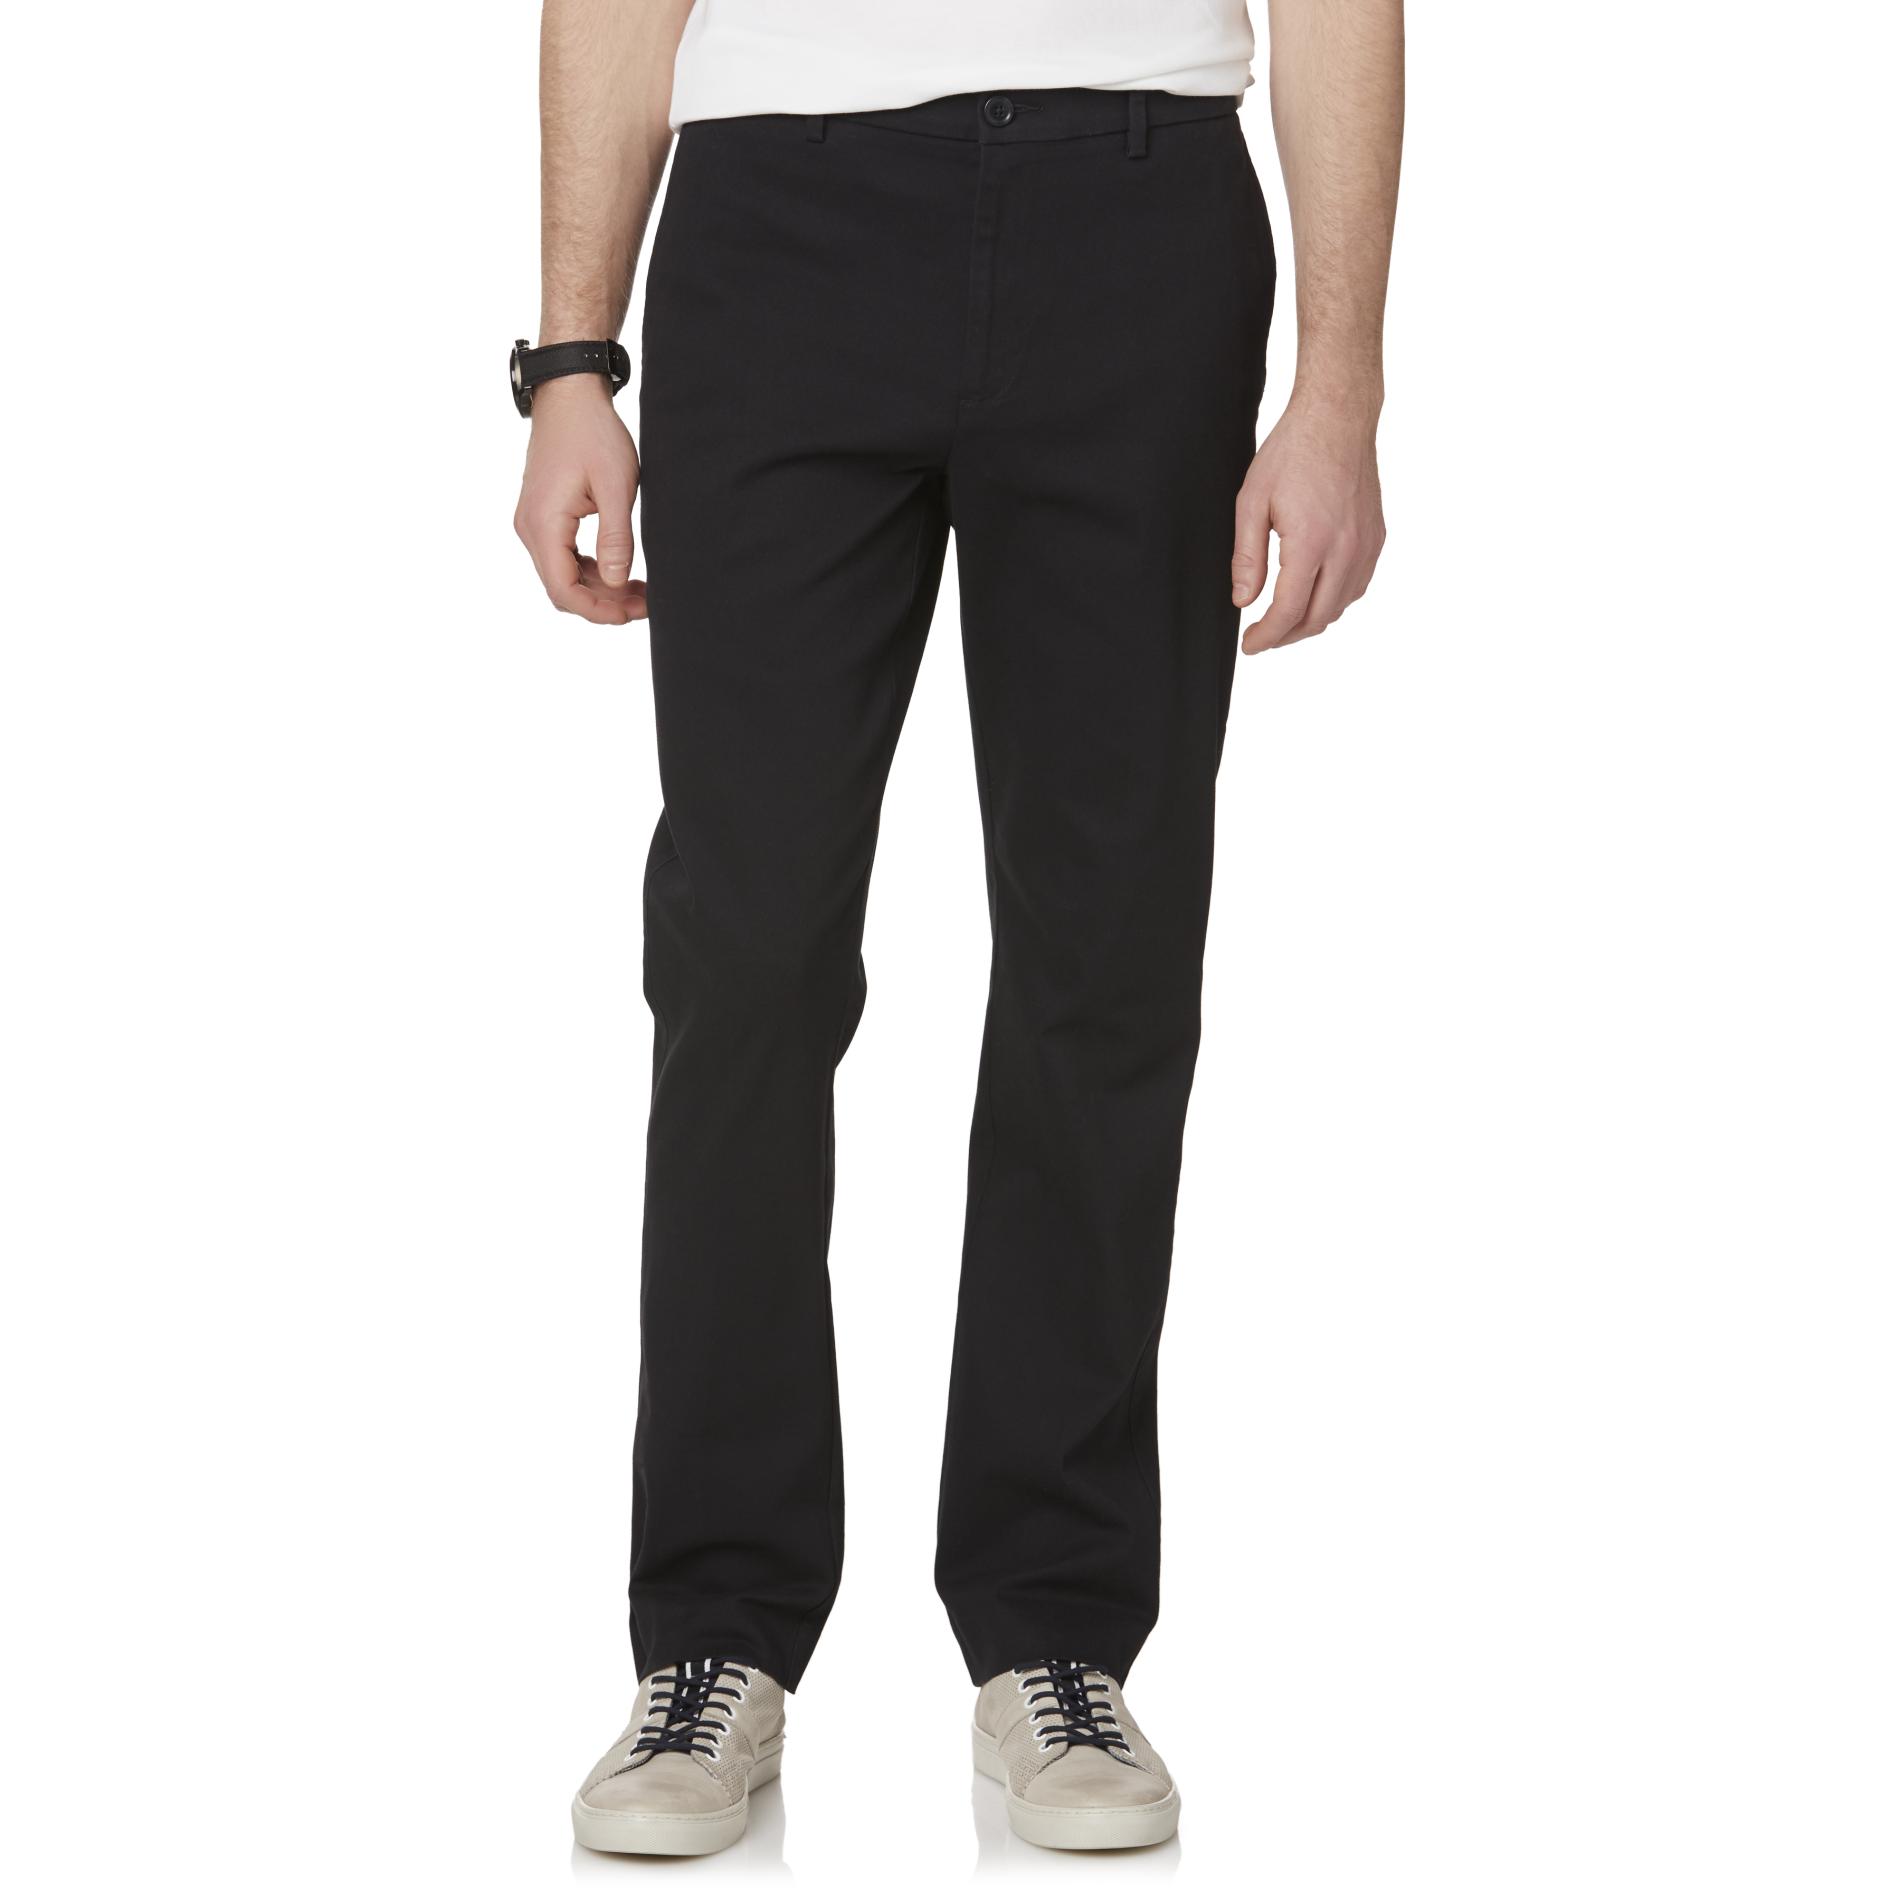 Structure Men's Slim Fit Chino Pants